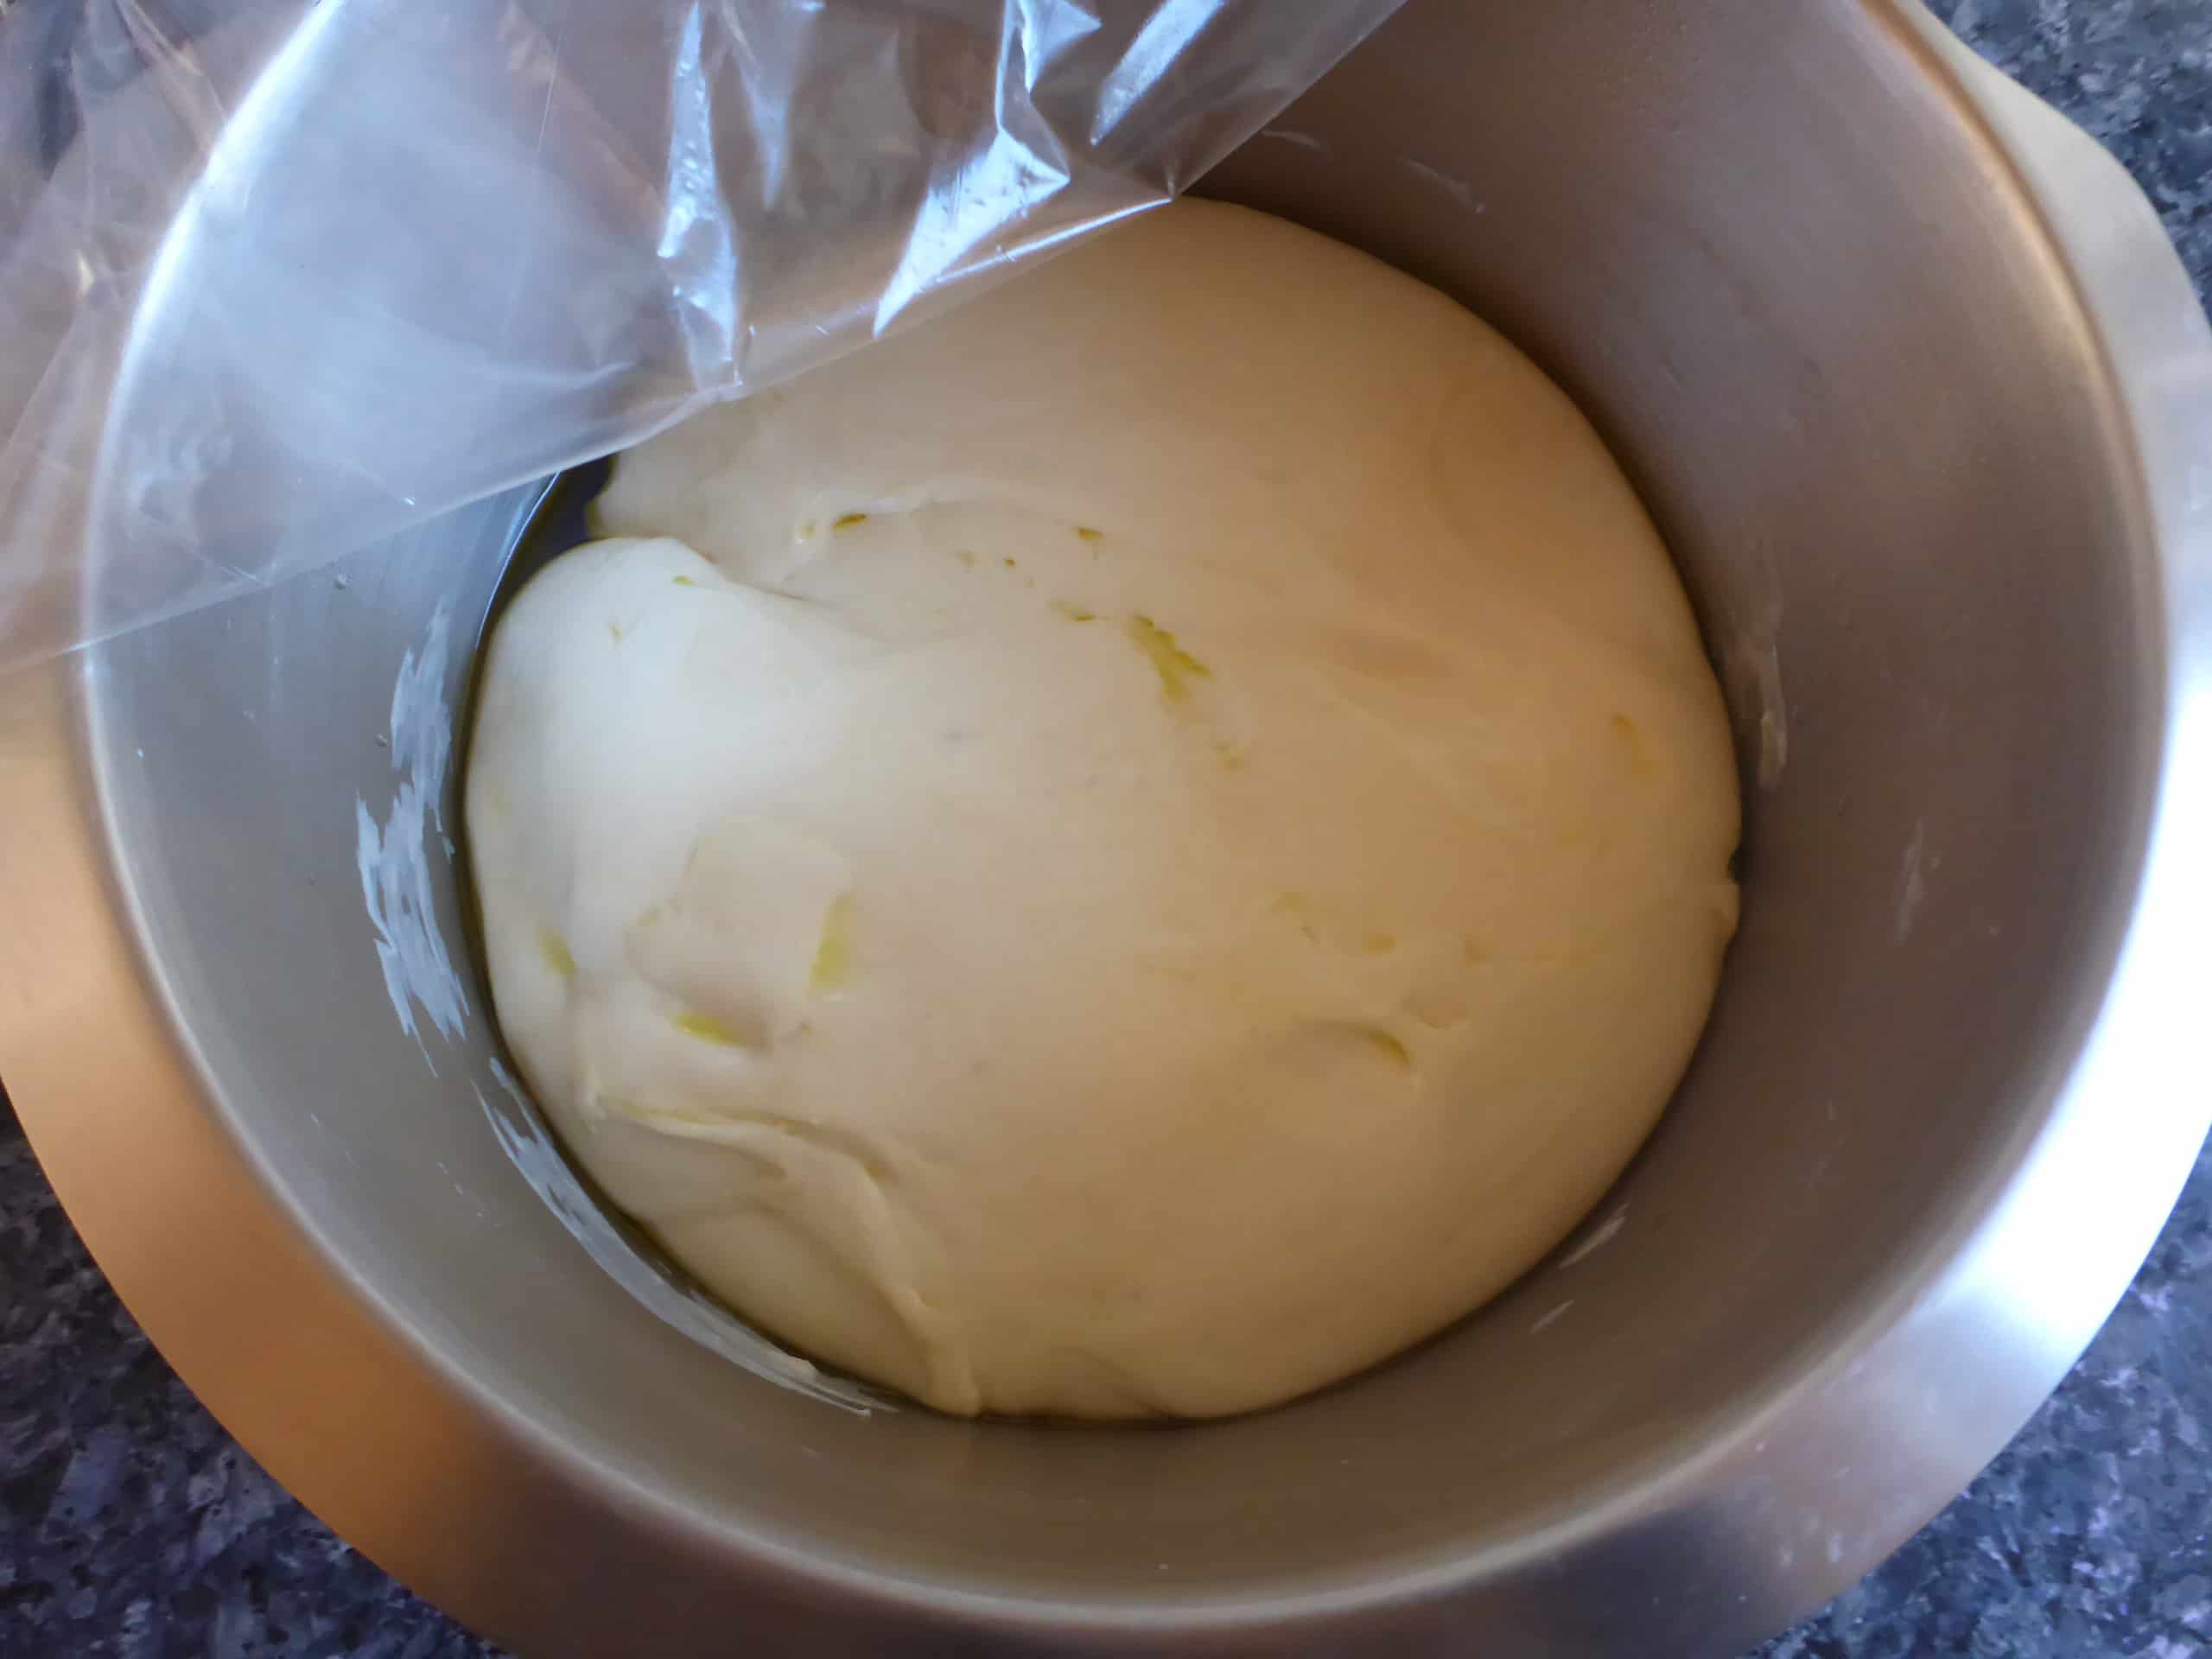 Yeast dough after the first rise.